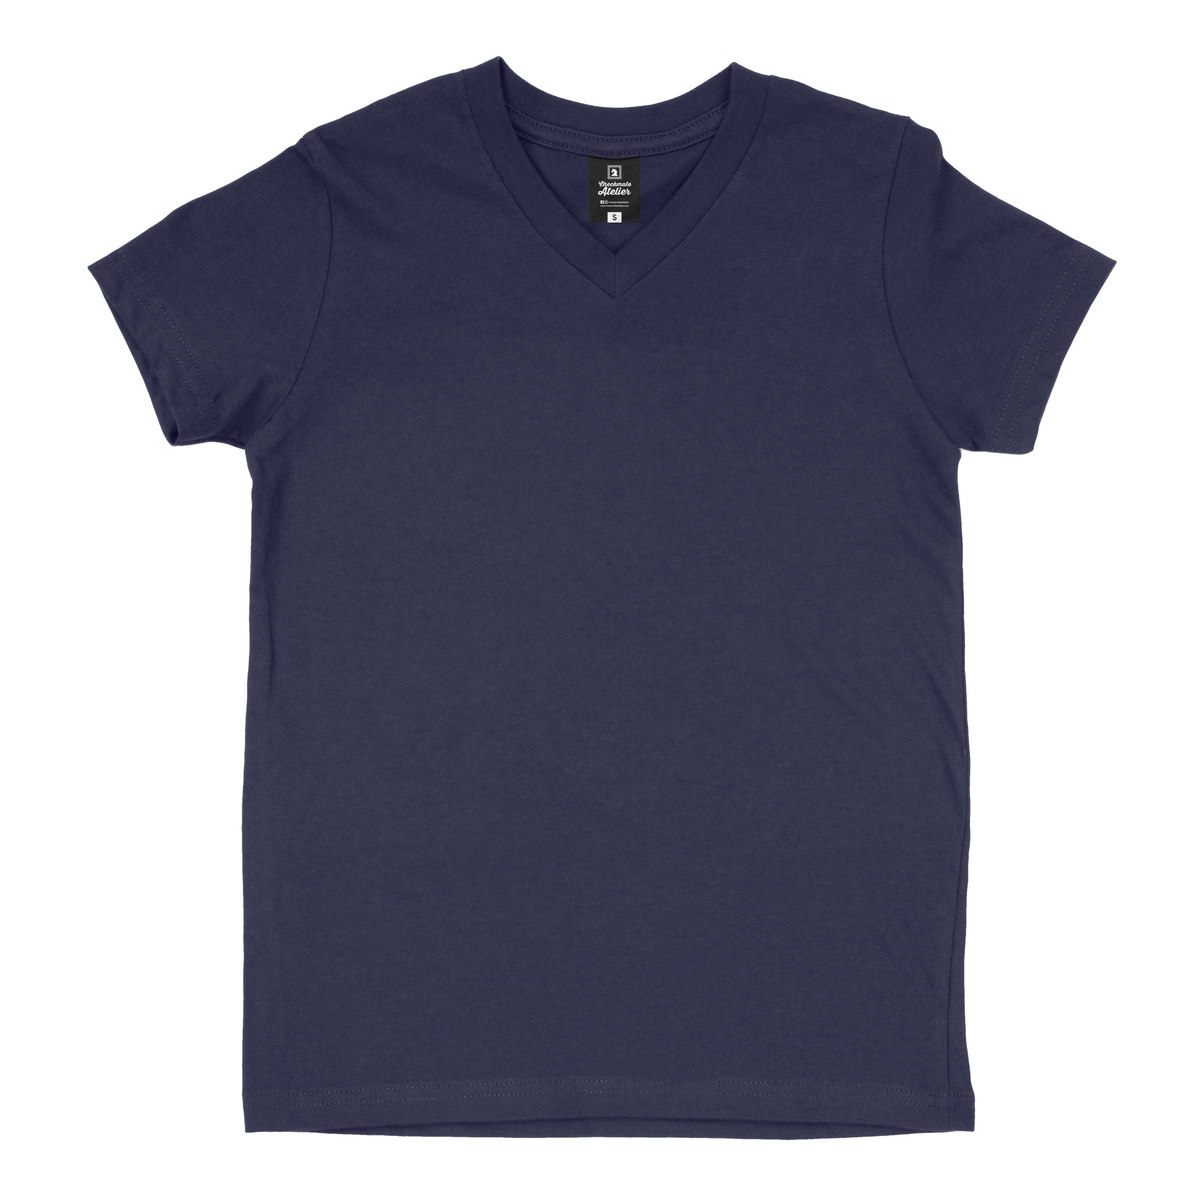 Navy Blue V-Neck T-Shirt - Checkmate Atelier - Official Online Store